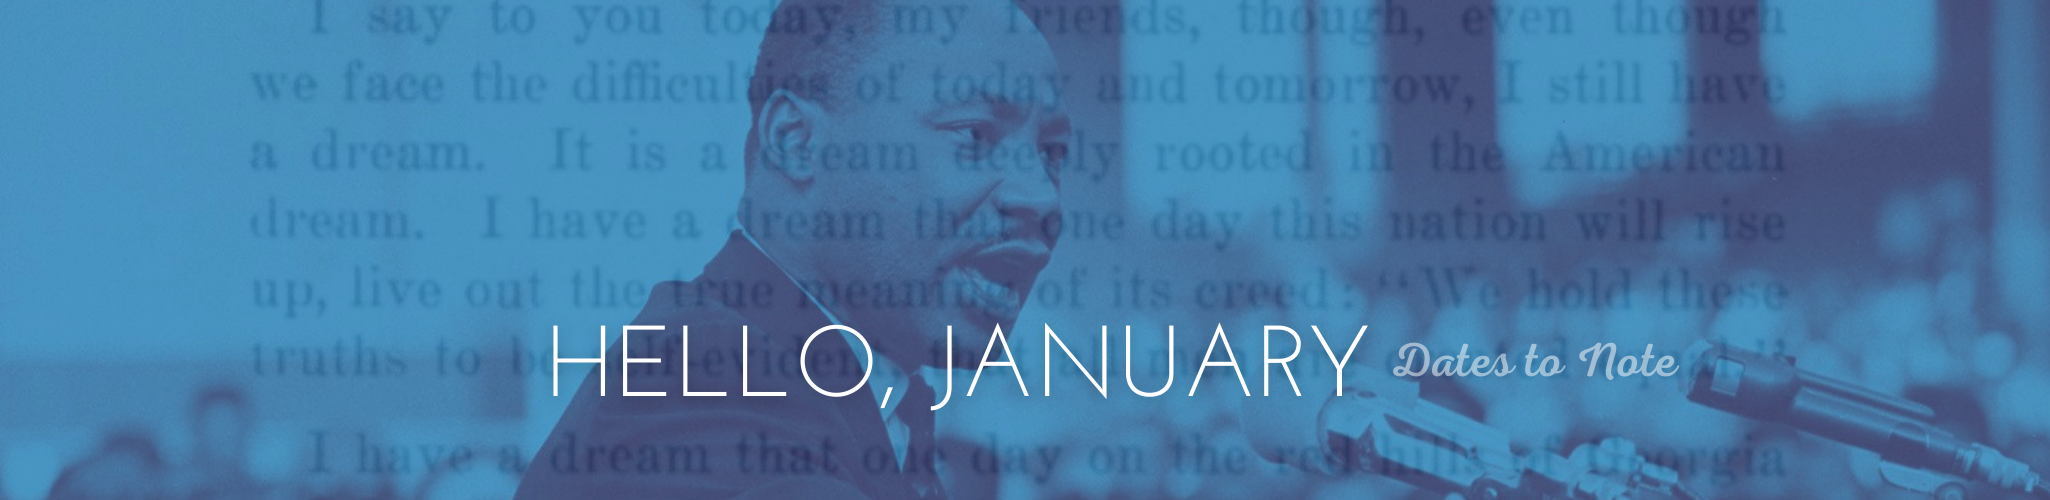 Martin Luther King Jr in background with text "Hello January, Dates to Note"